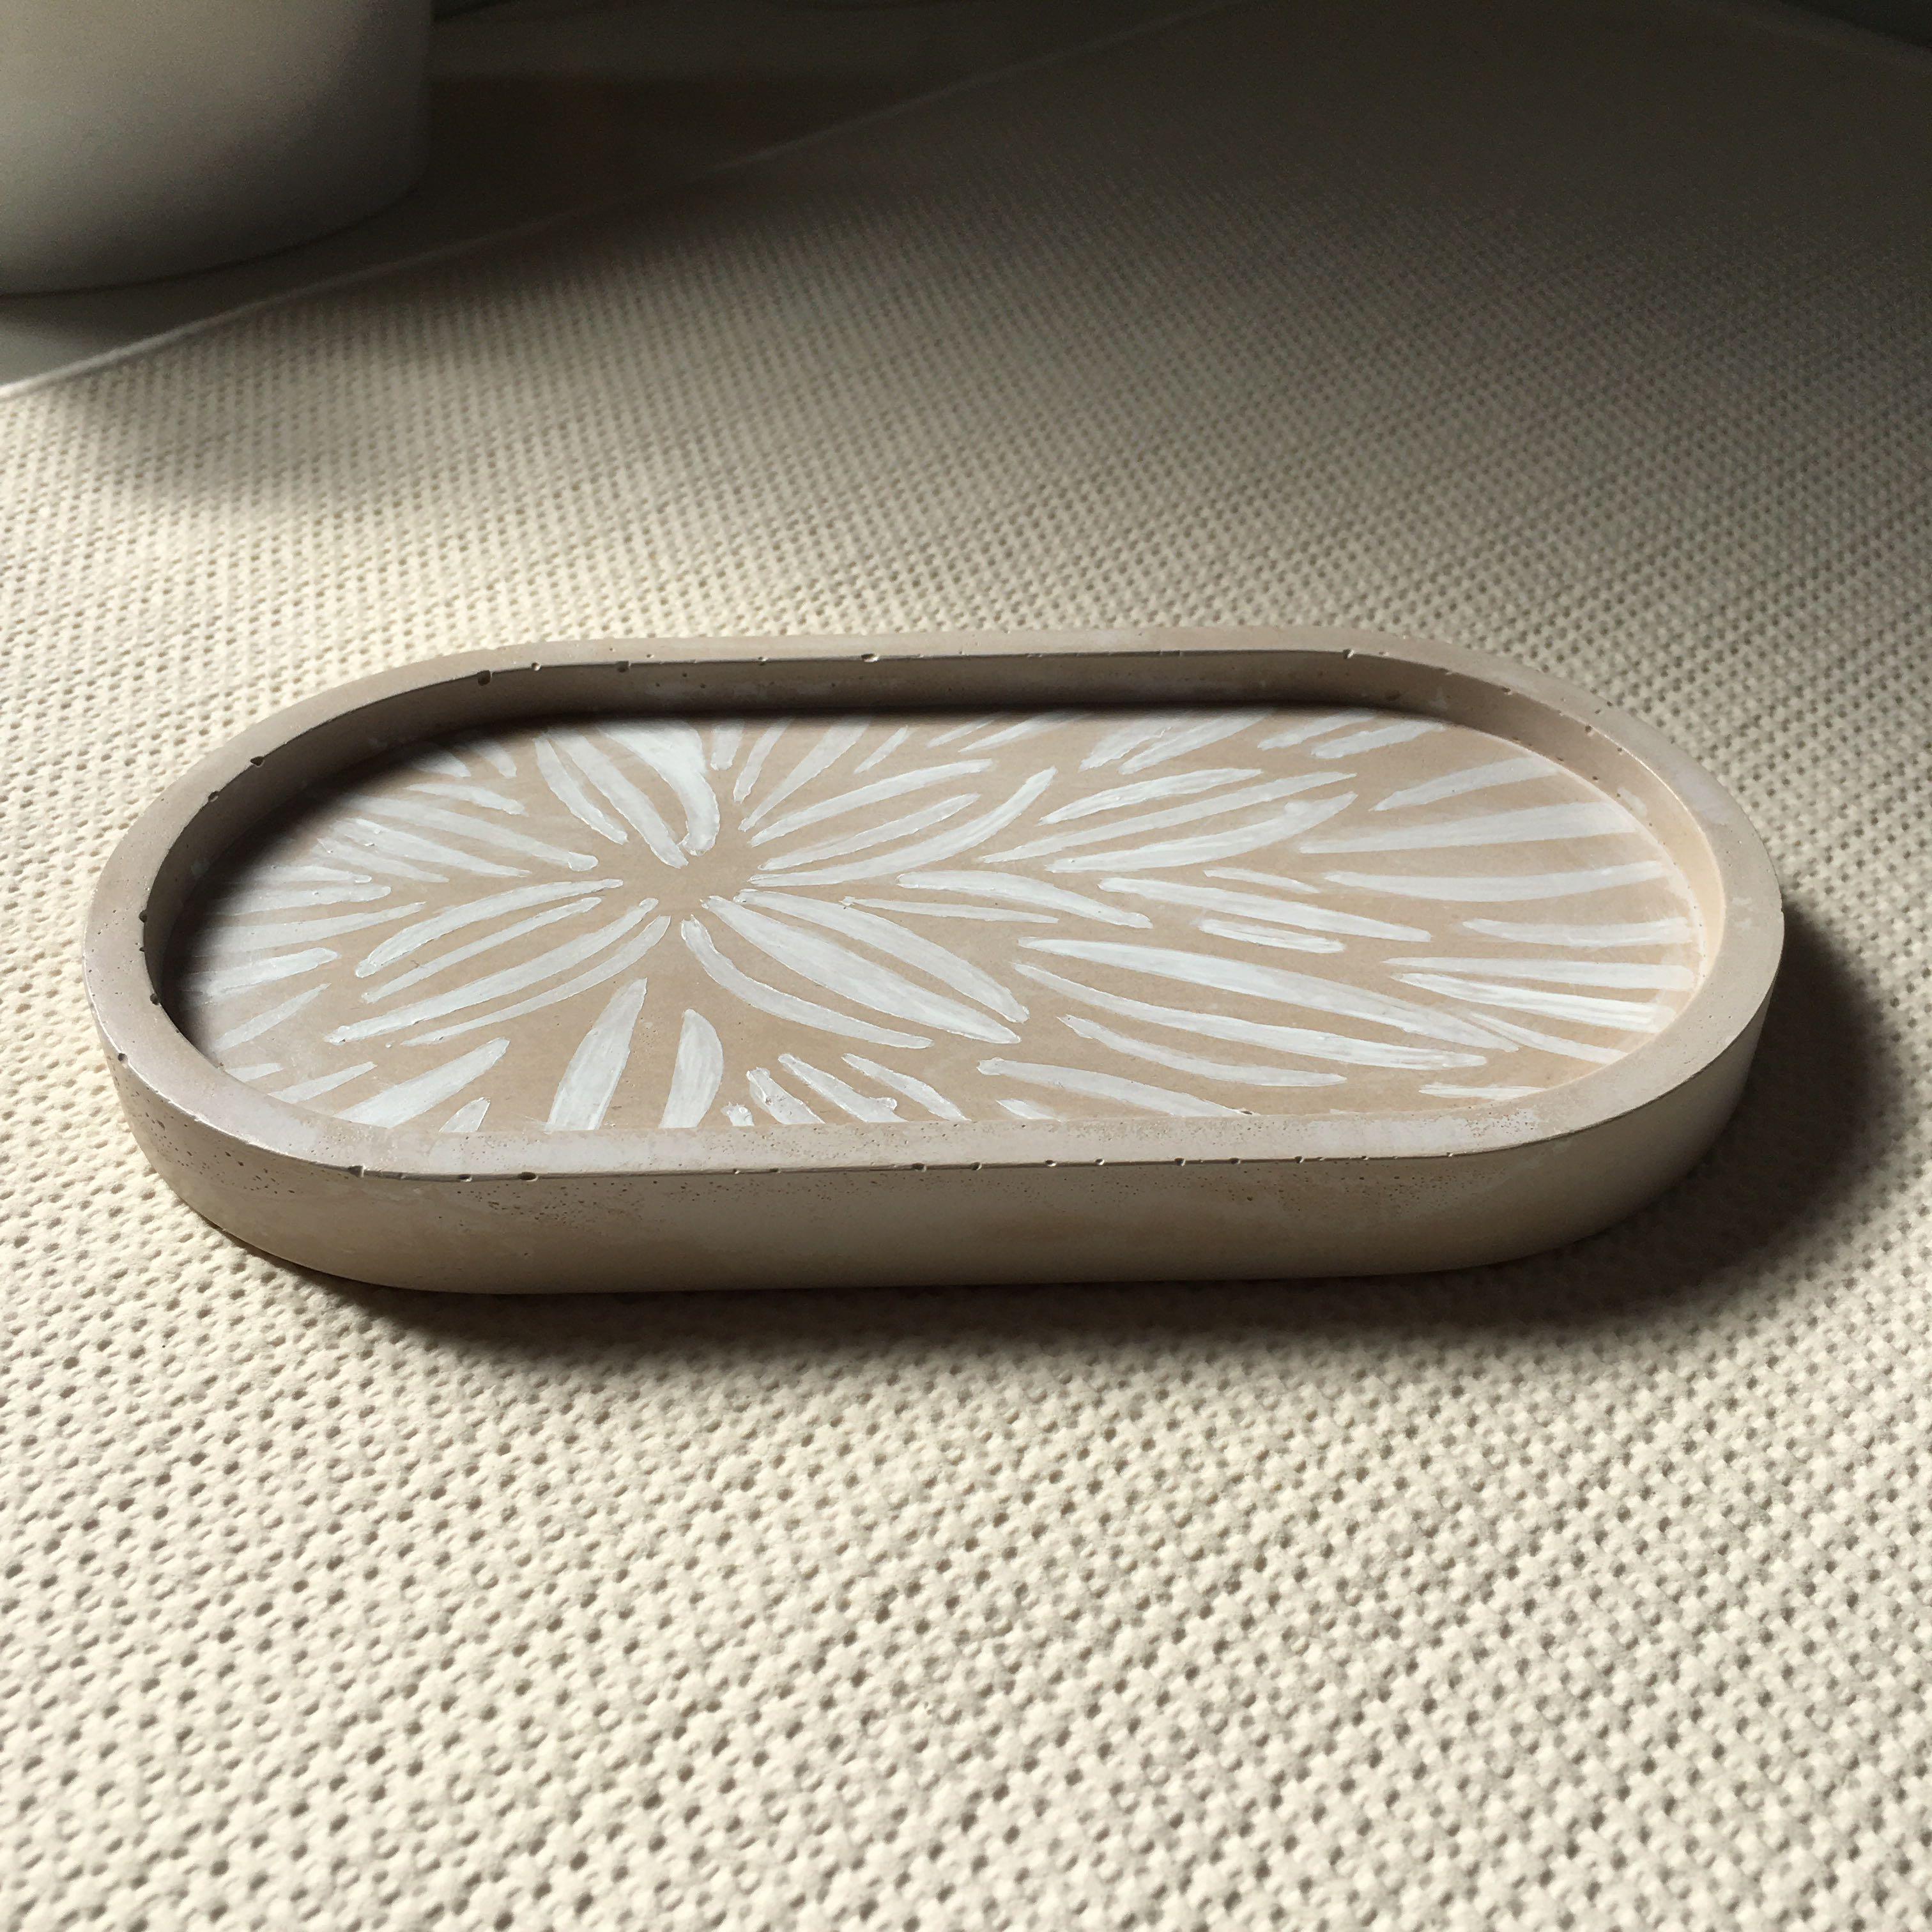 💝FREE 💝GIVEAWAY Handmade Concrete Oval Tray / Home deco / Home